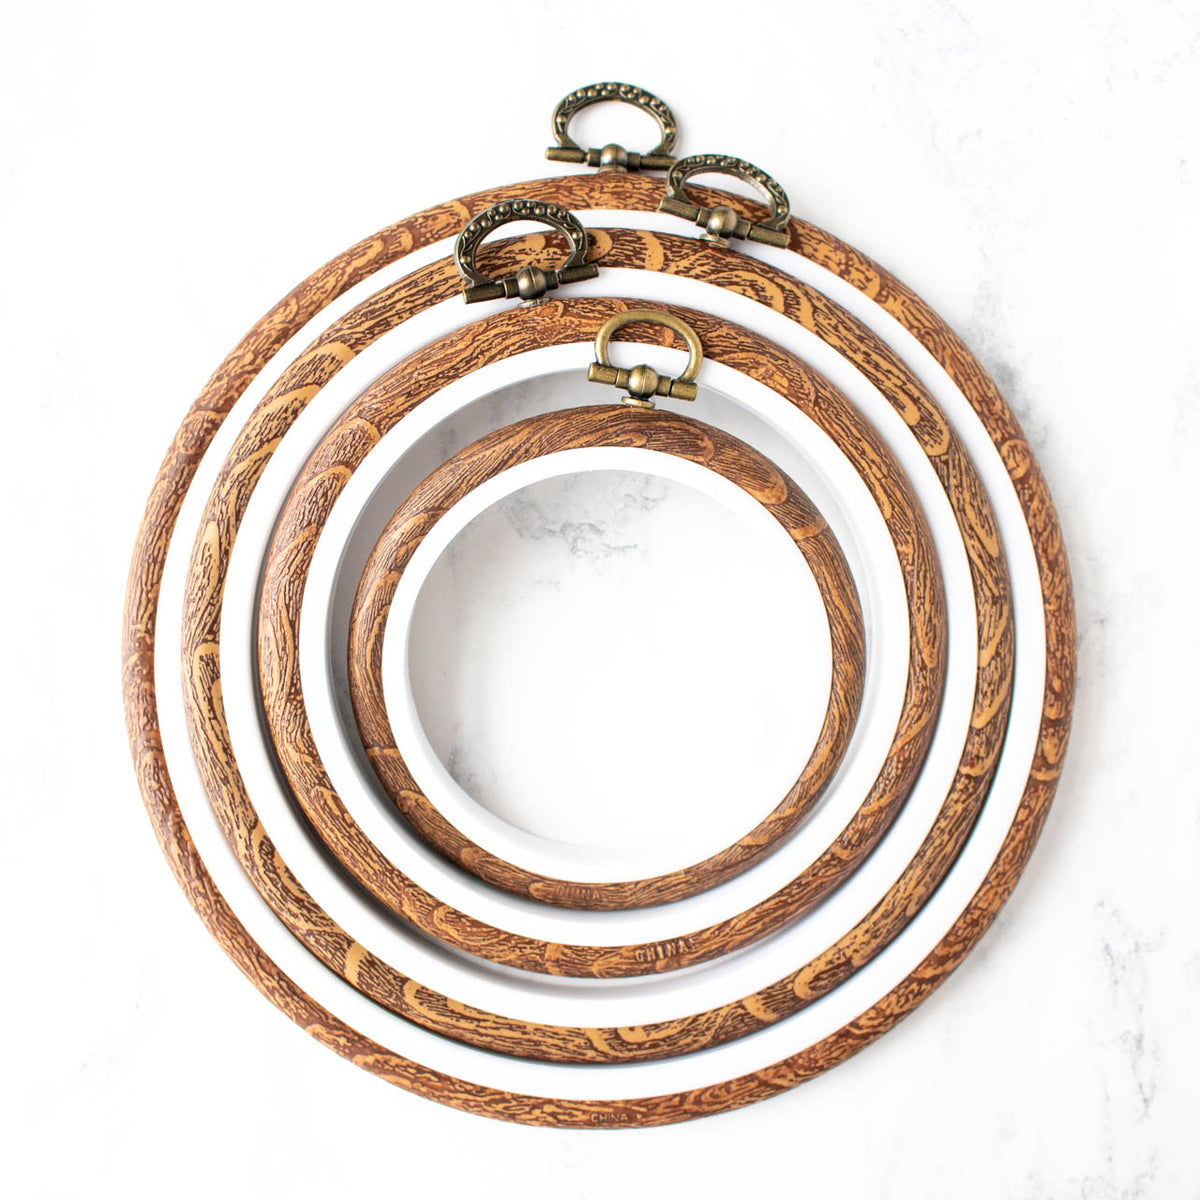 Faux Wood Flexible Embroidery Hoop - Round